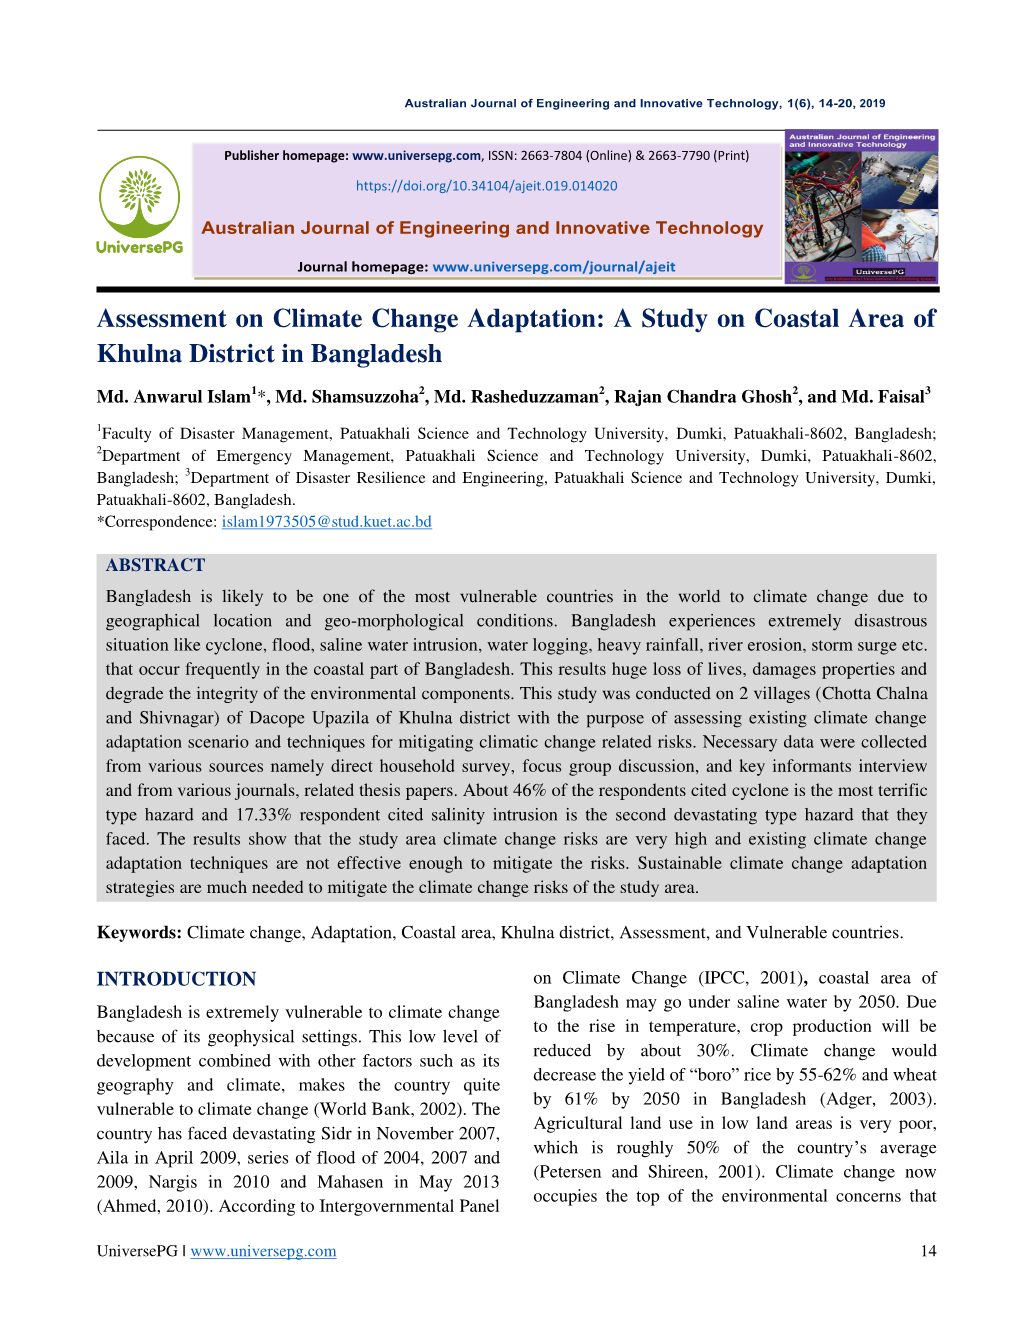 Assessment on Climate Change Adaptation: a Study on Coastal Area of Khulna District in Bangladesh